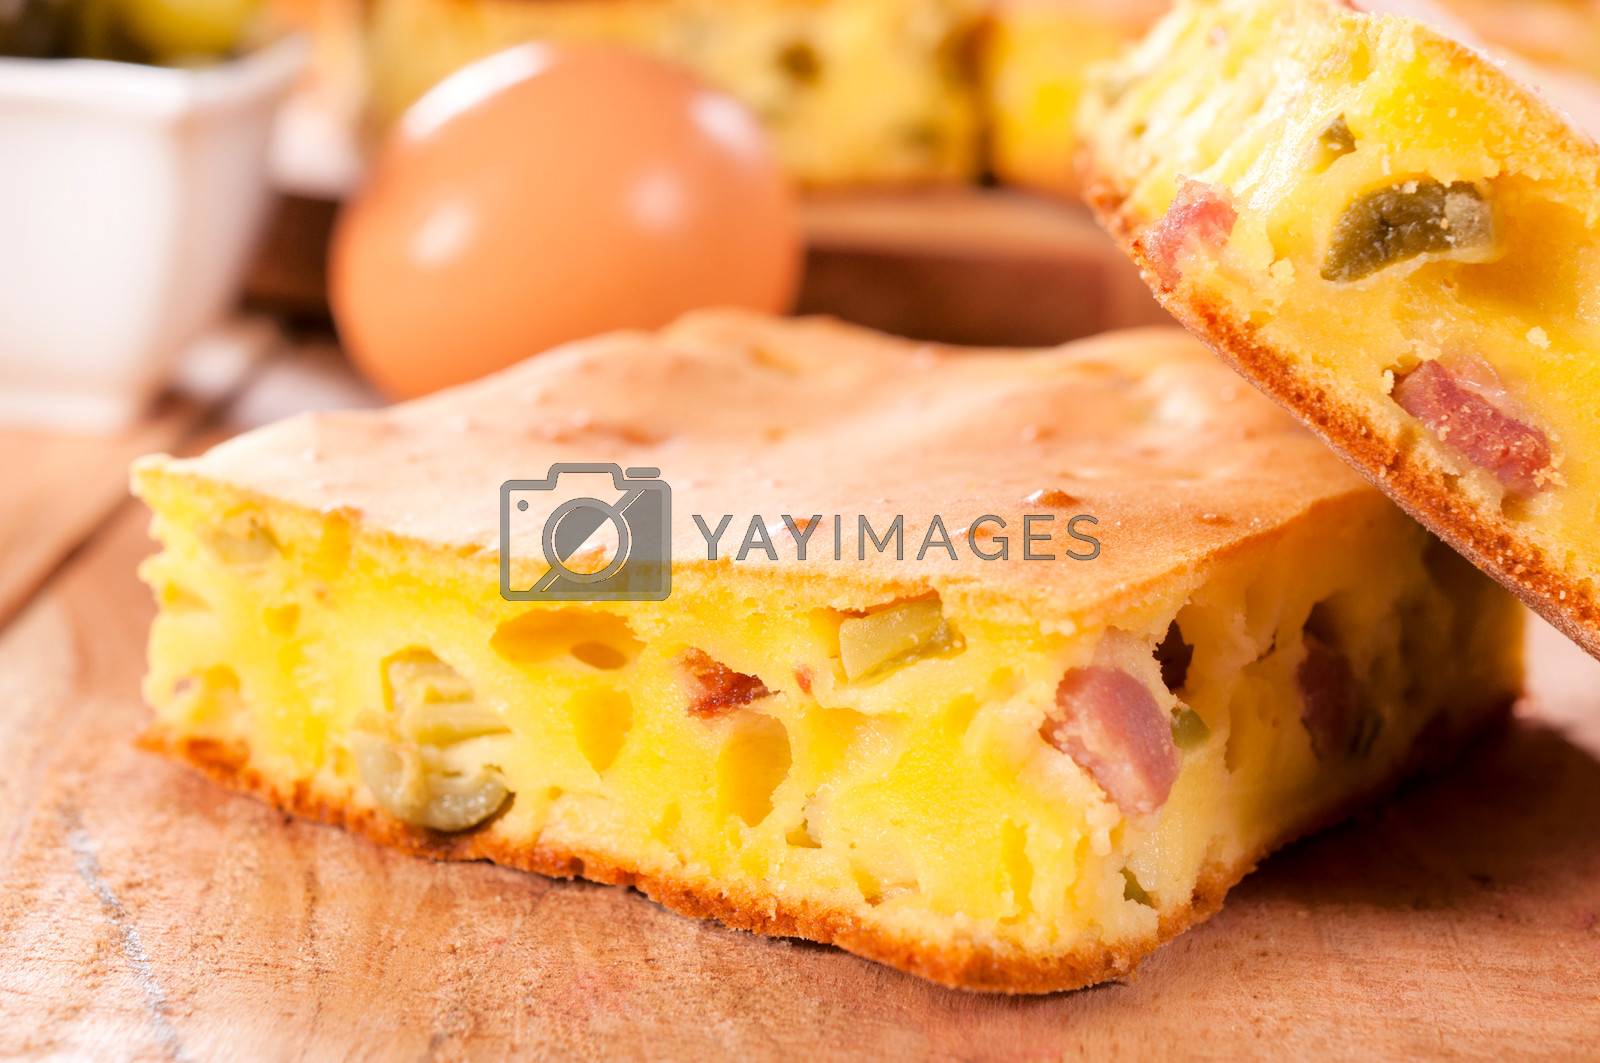 Royalty free image of Tasty pie by badmanproduction